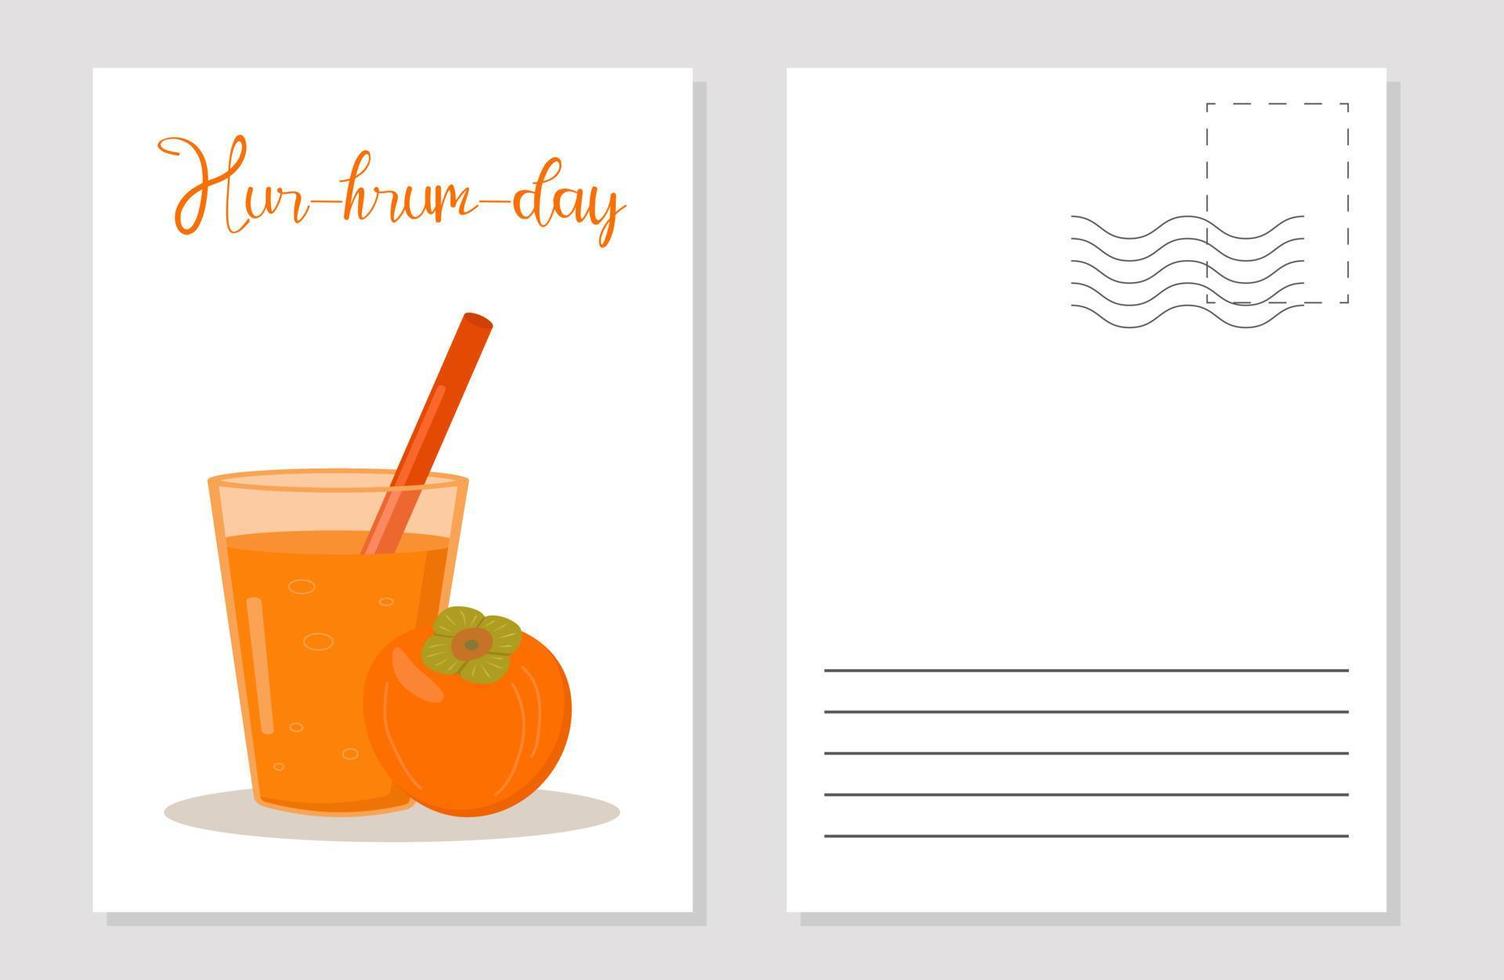 the layout of the greeting card persimmon day persimmon day fruit juice vector